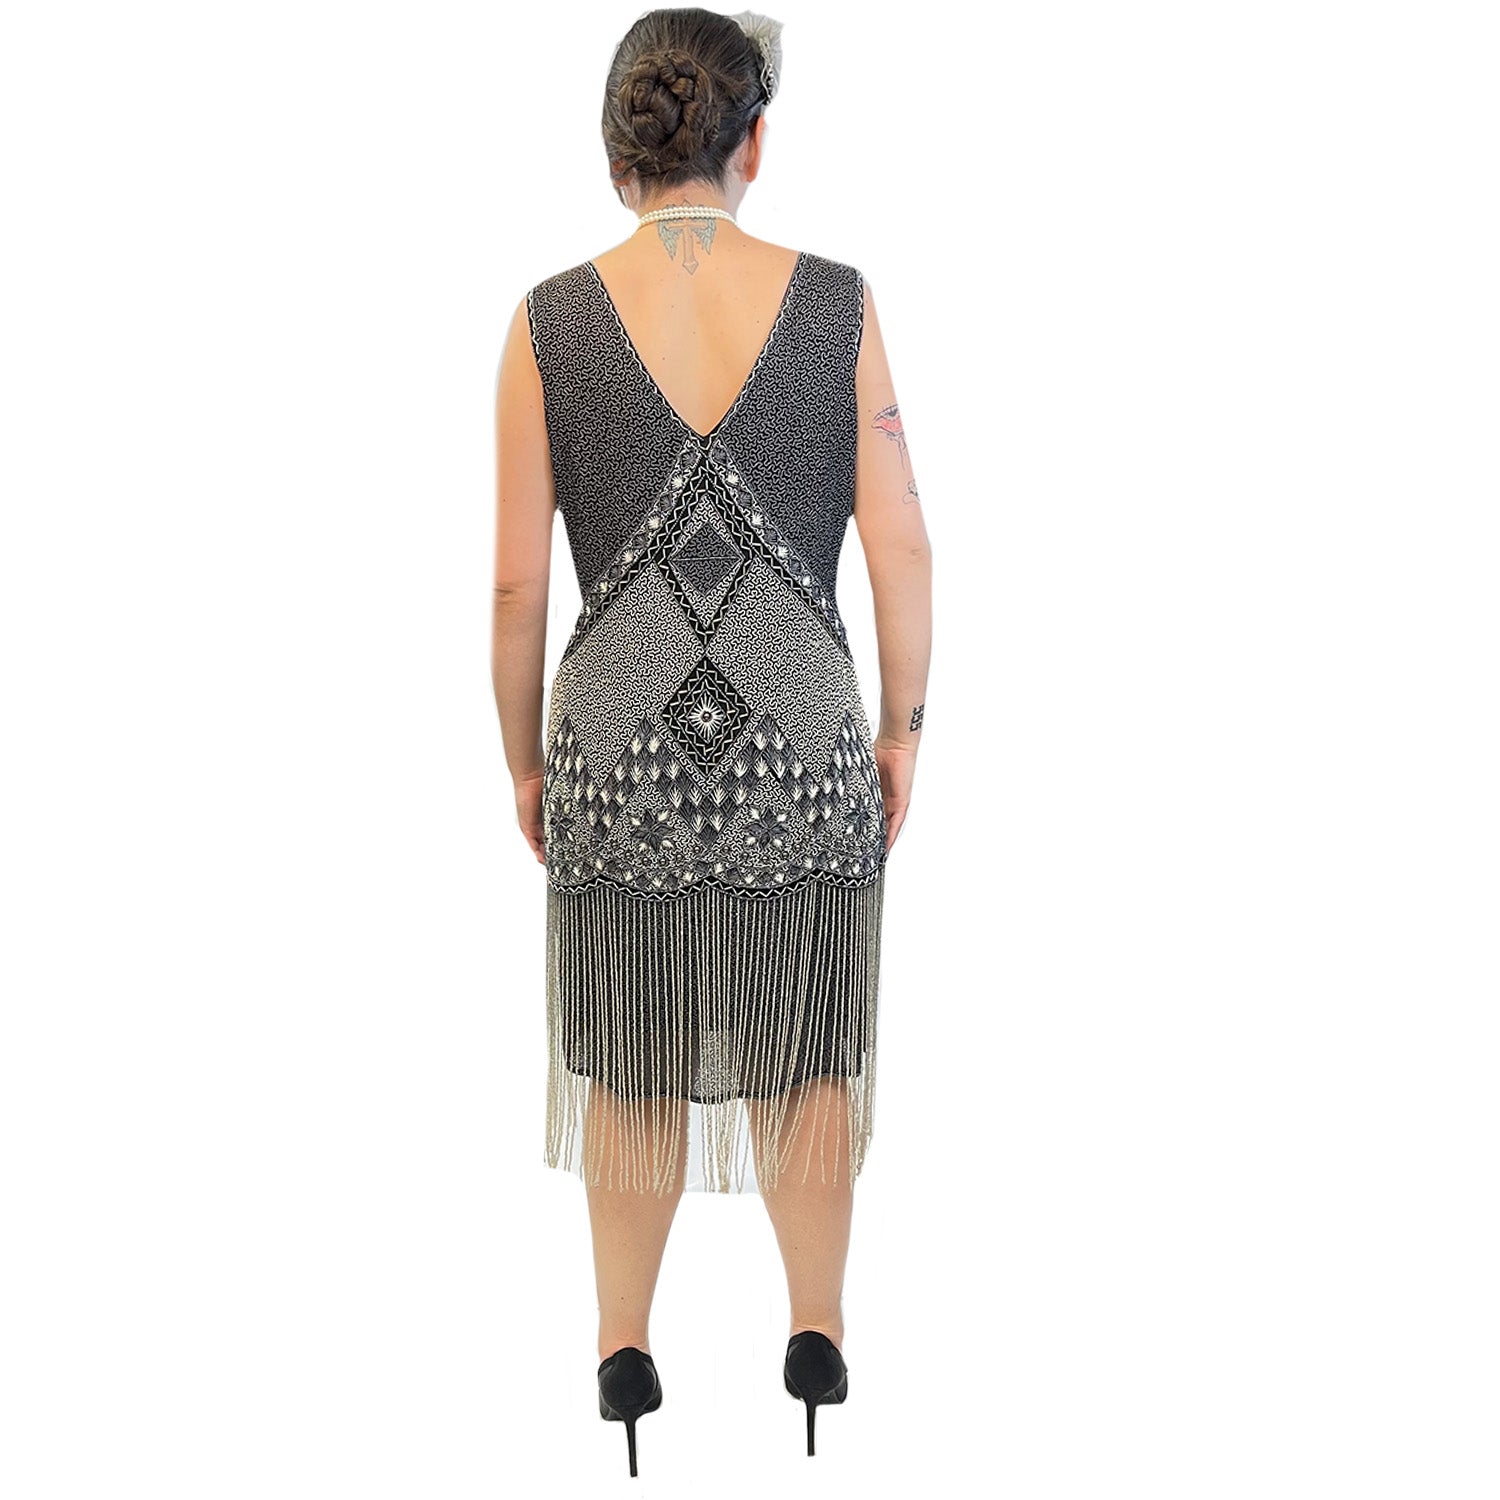 Premiere 1920s Black and Grey Beaded Flapper Dress Adult Costume